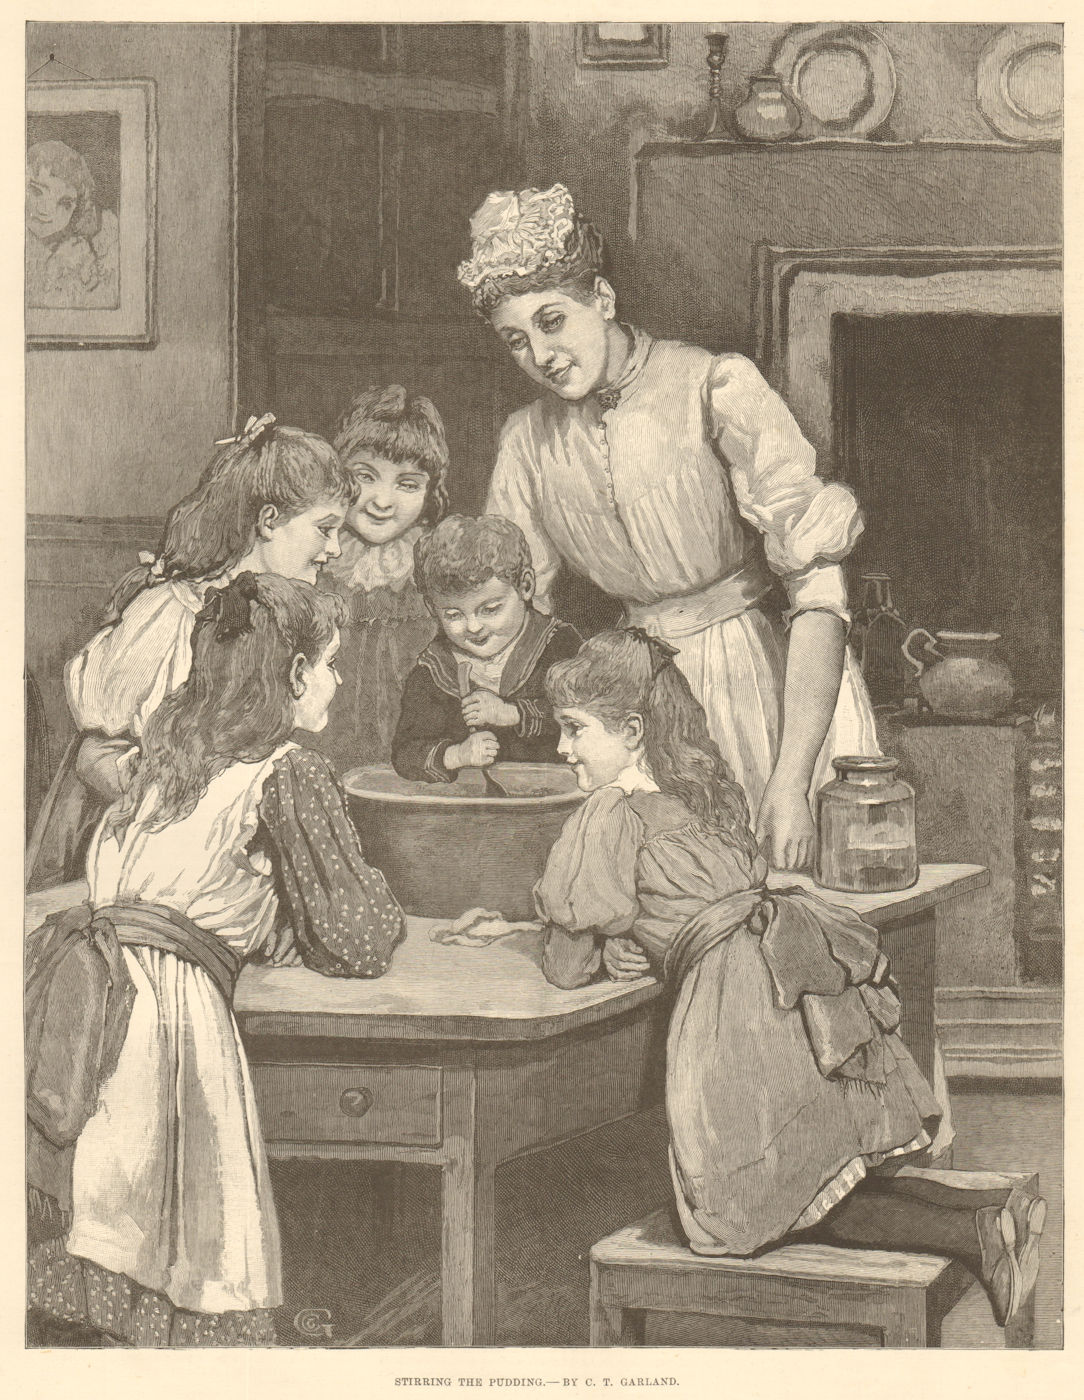 Associate Product Stirring the pudding, by C. T. Garland. Family. Hospitality 1892 ILN full page